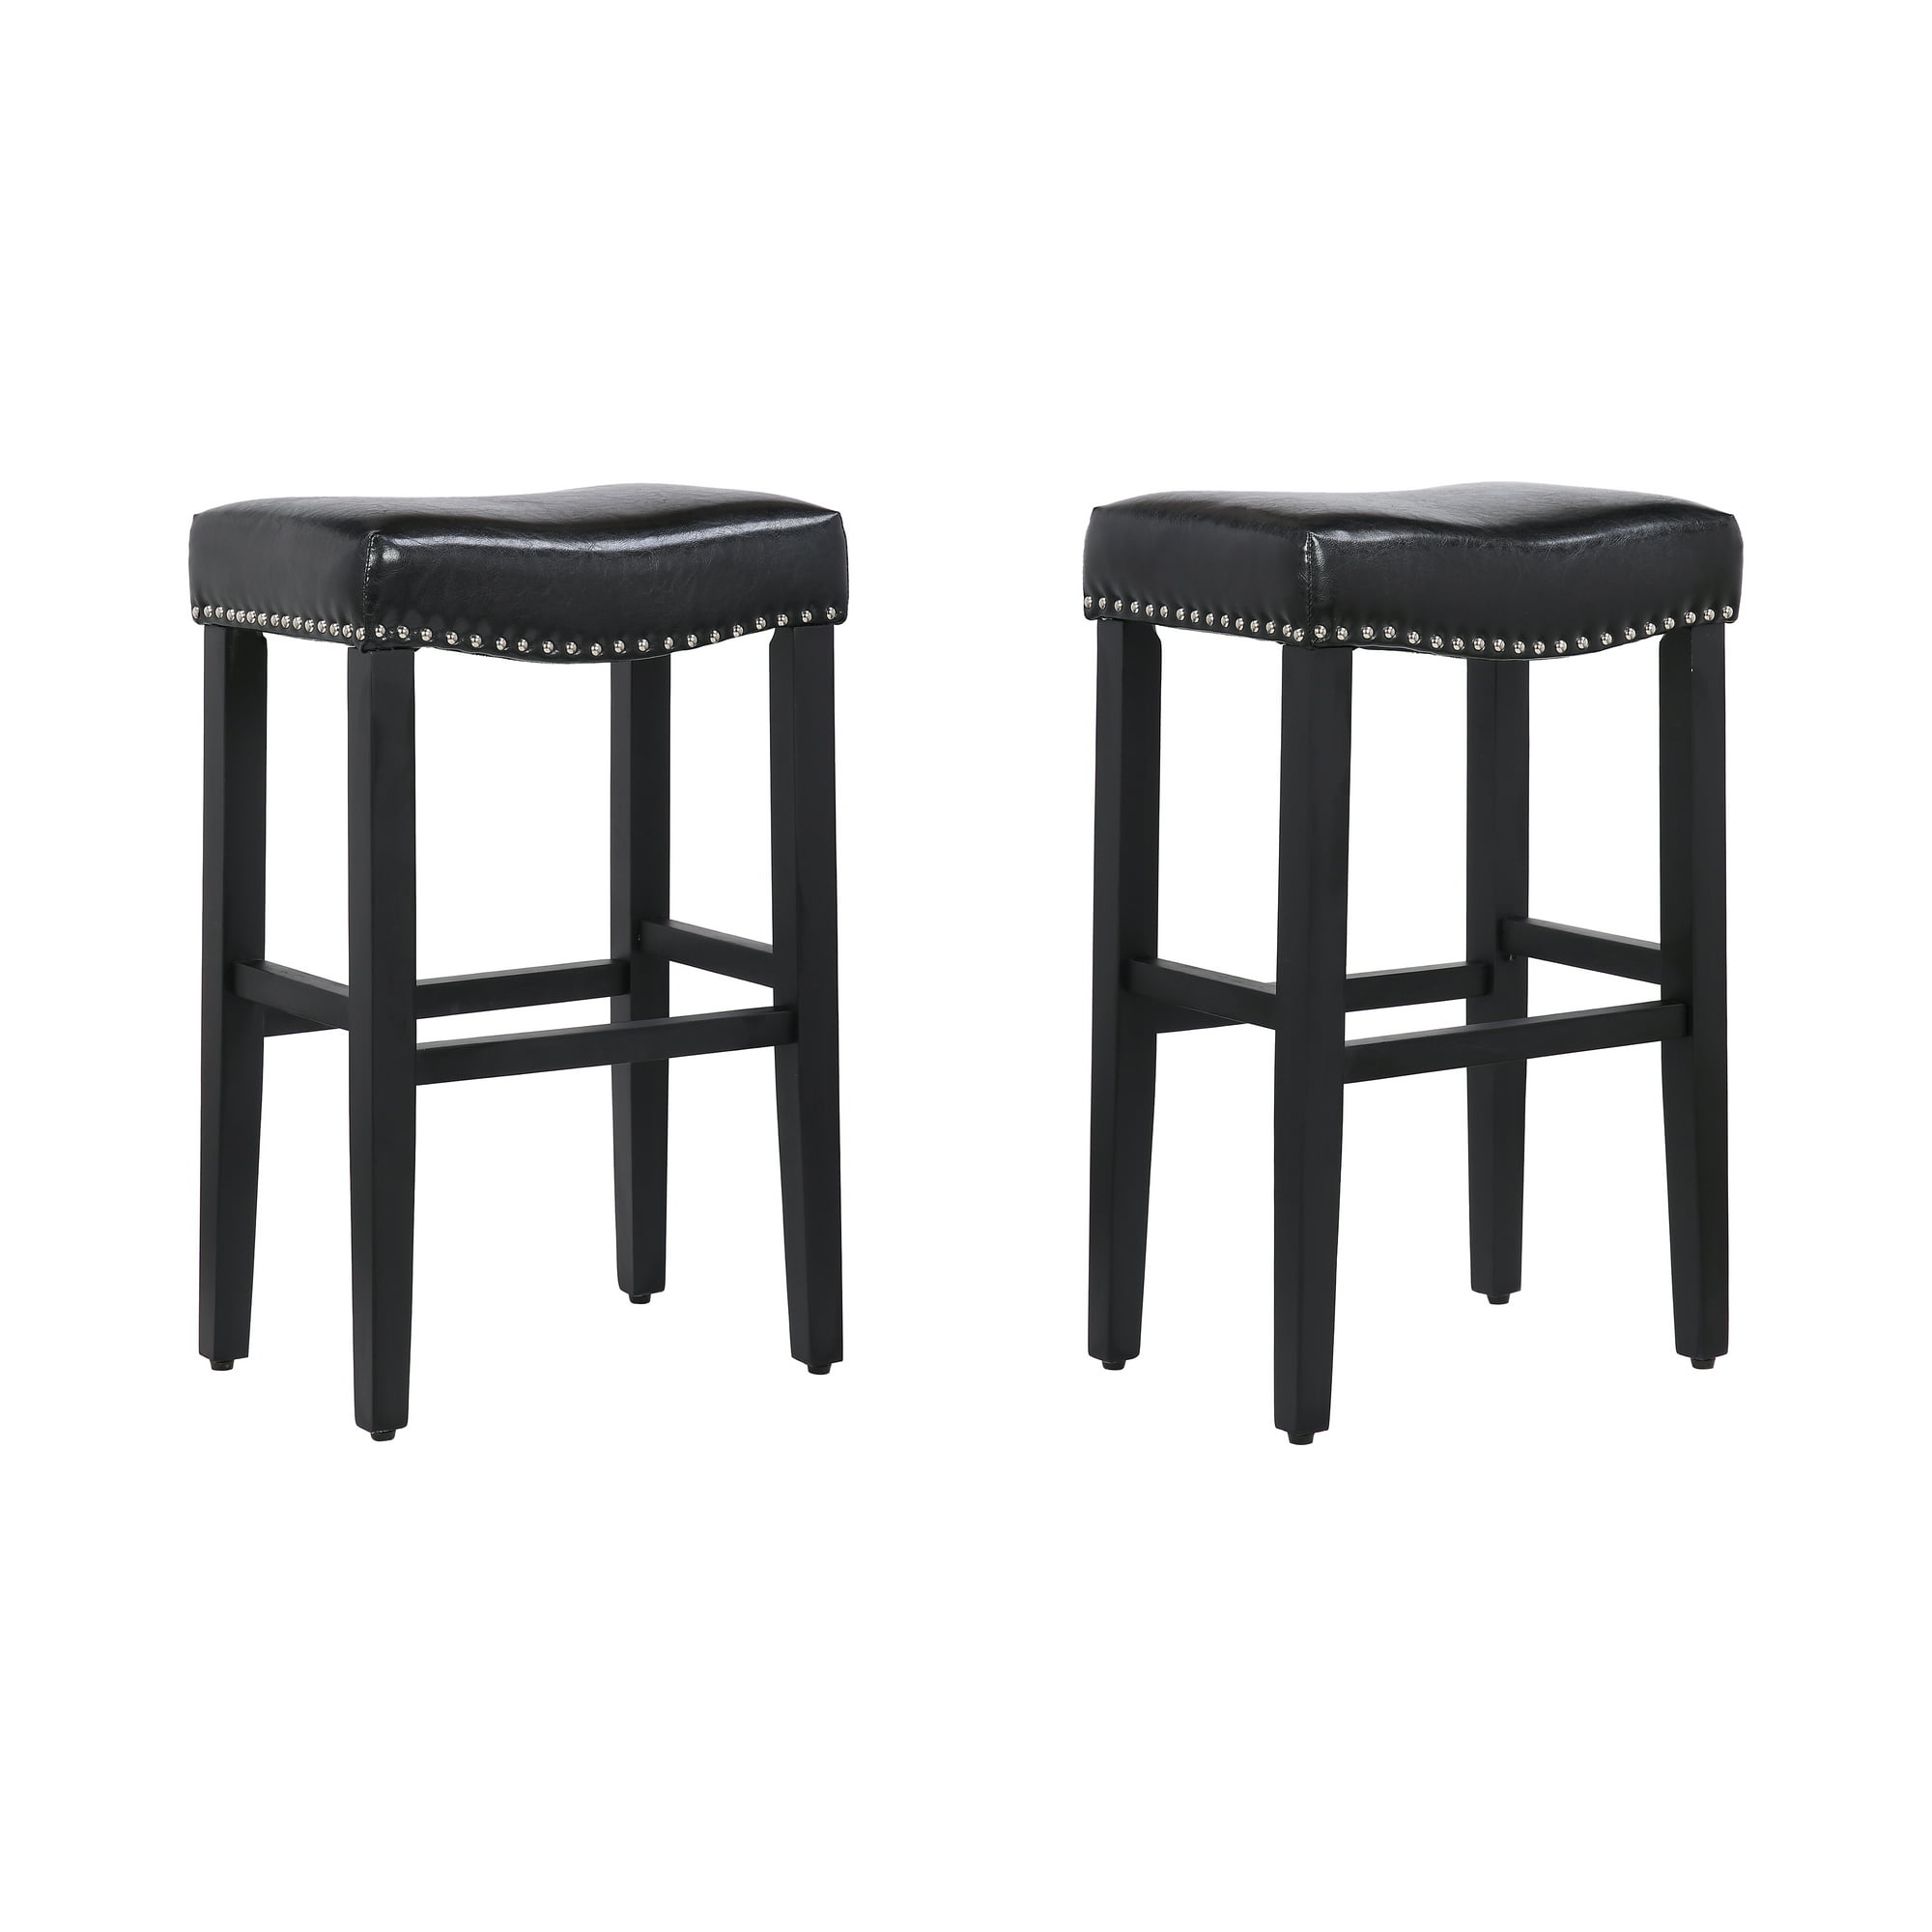 WestinTrends Black Bar Stools Set of 2, 29 Inch Tall Farmhouse Kitchen  Wooden Saddle Stool Chair, Leather Upholstered Cushion with Solid Wood Leg 